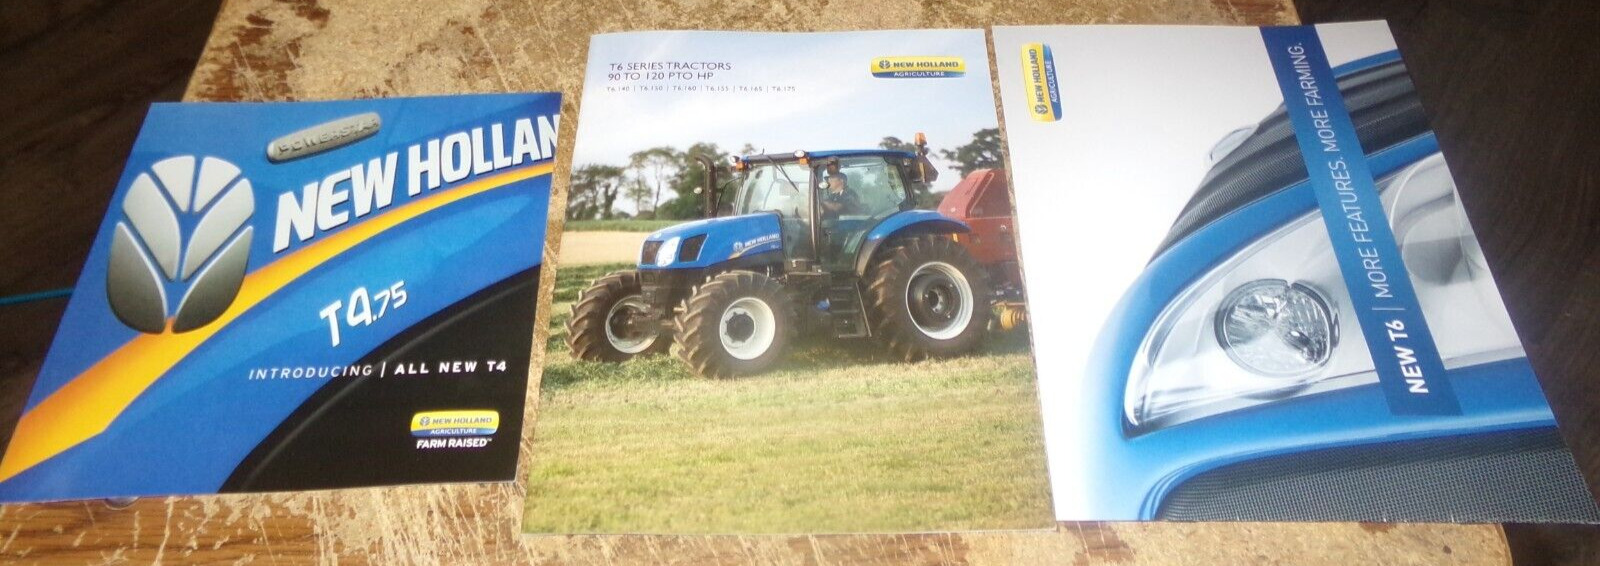 3-lot 2010-15 new holland T4+T6 tractors brochures in nice shape used